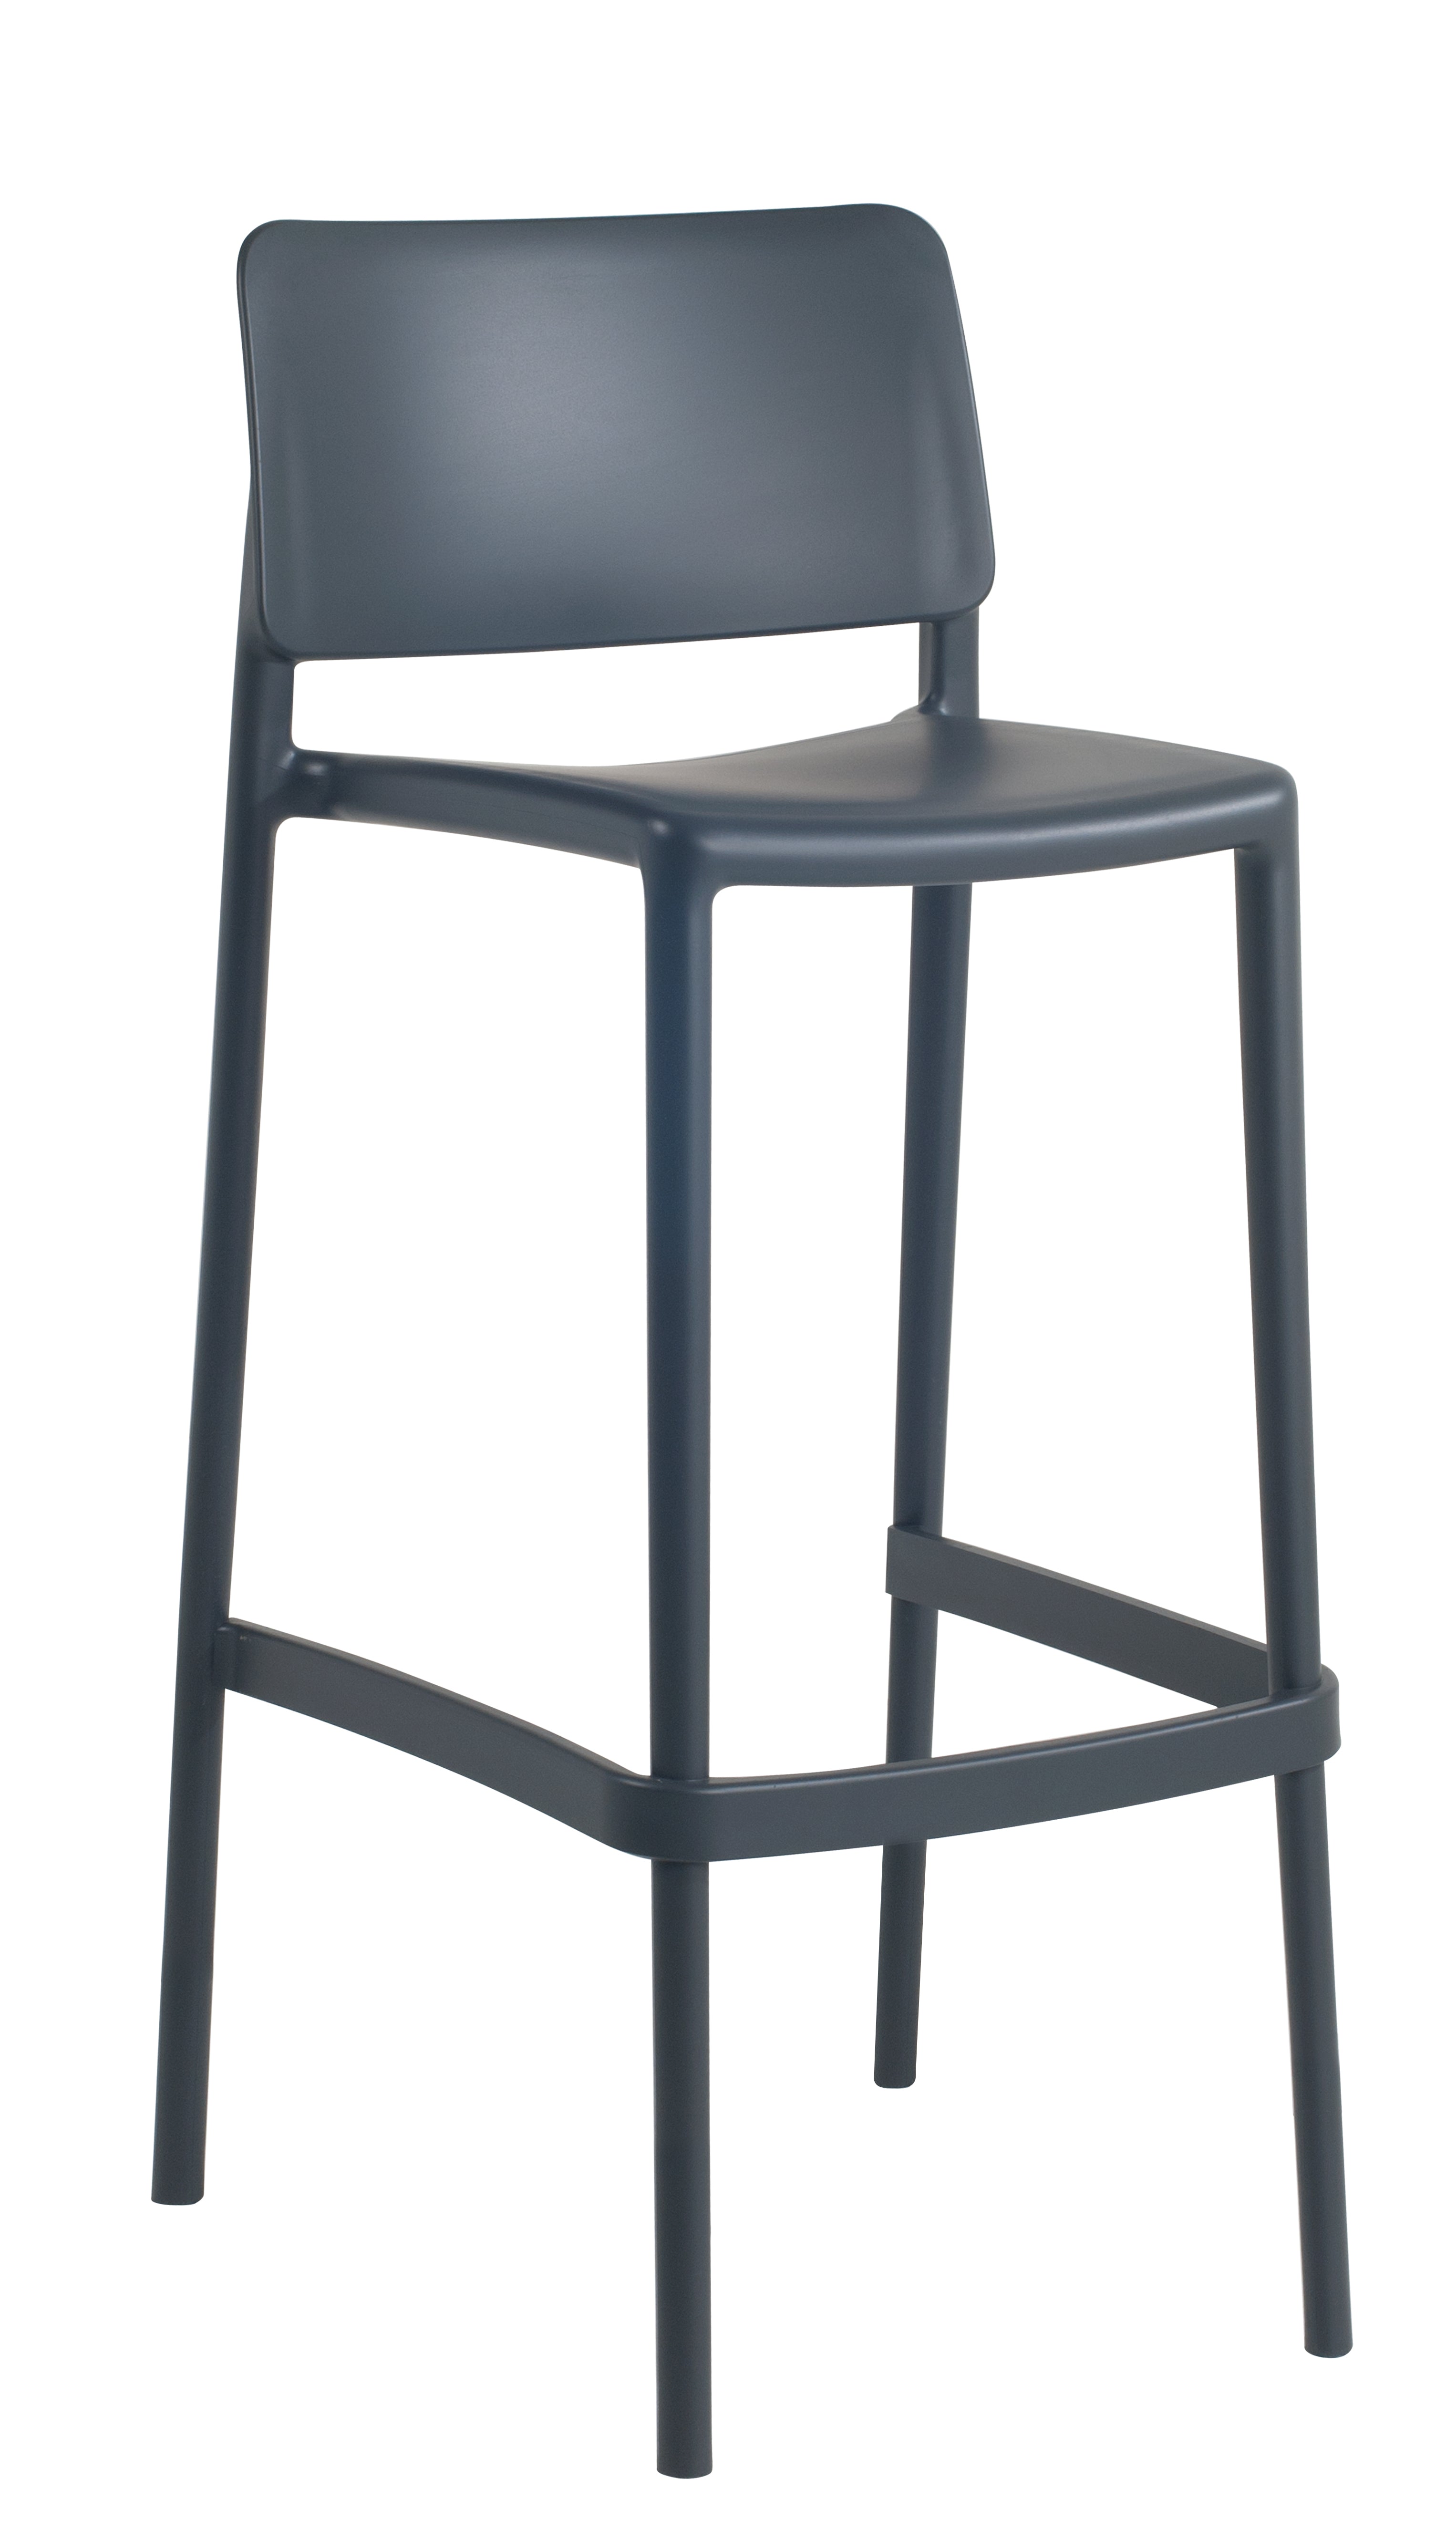 Cleo Patio Plastic Stackable Bar Height Bar Stool in Anthracite Black - (Set of 2)